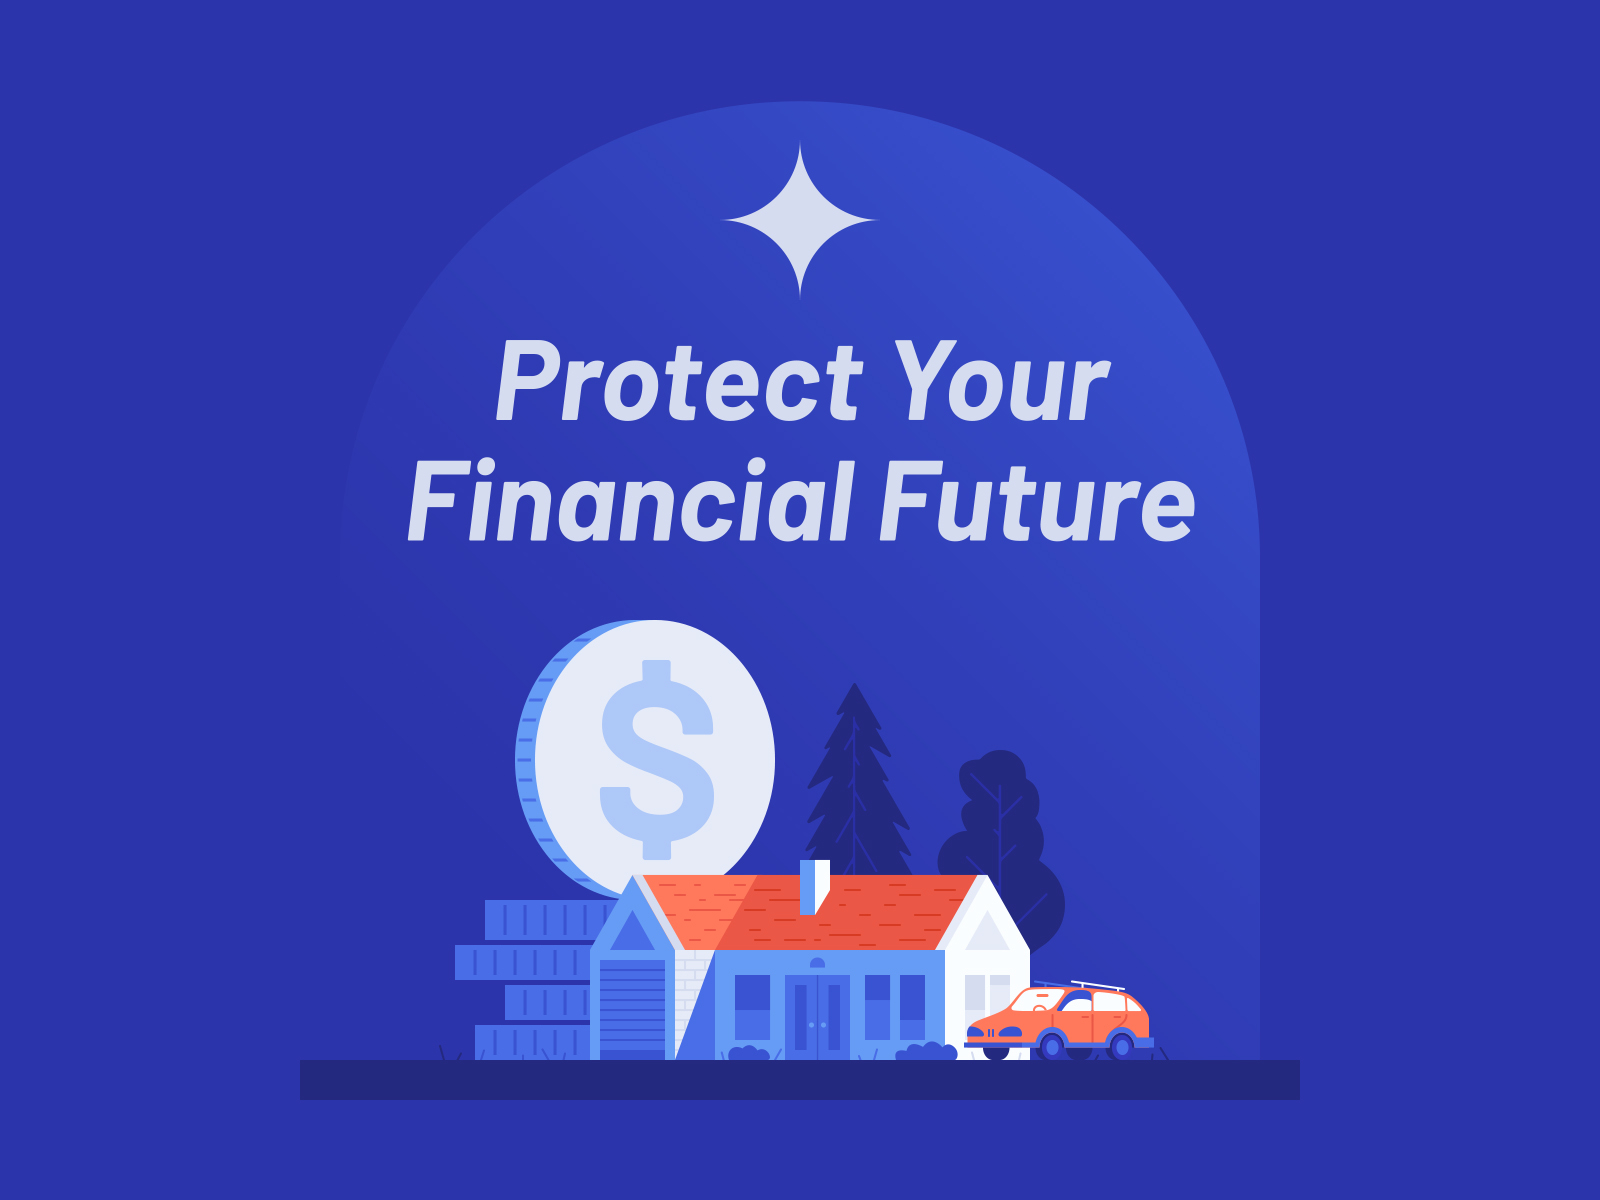 Protect Financial Future protect dollar coin car mountain house coins insurance house home finance design title flat vector illustration